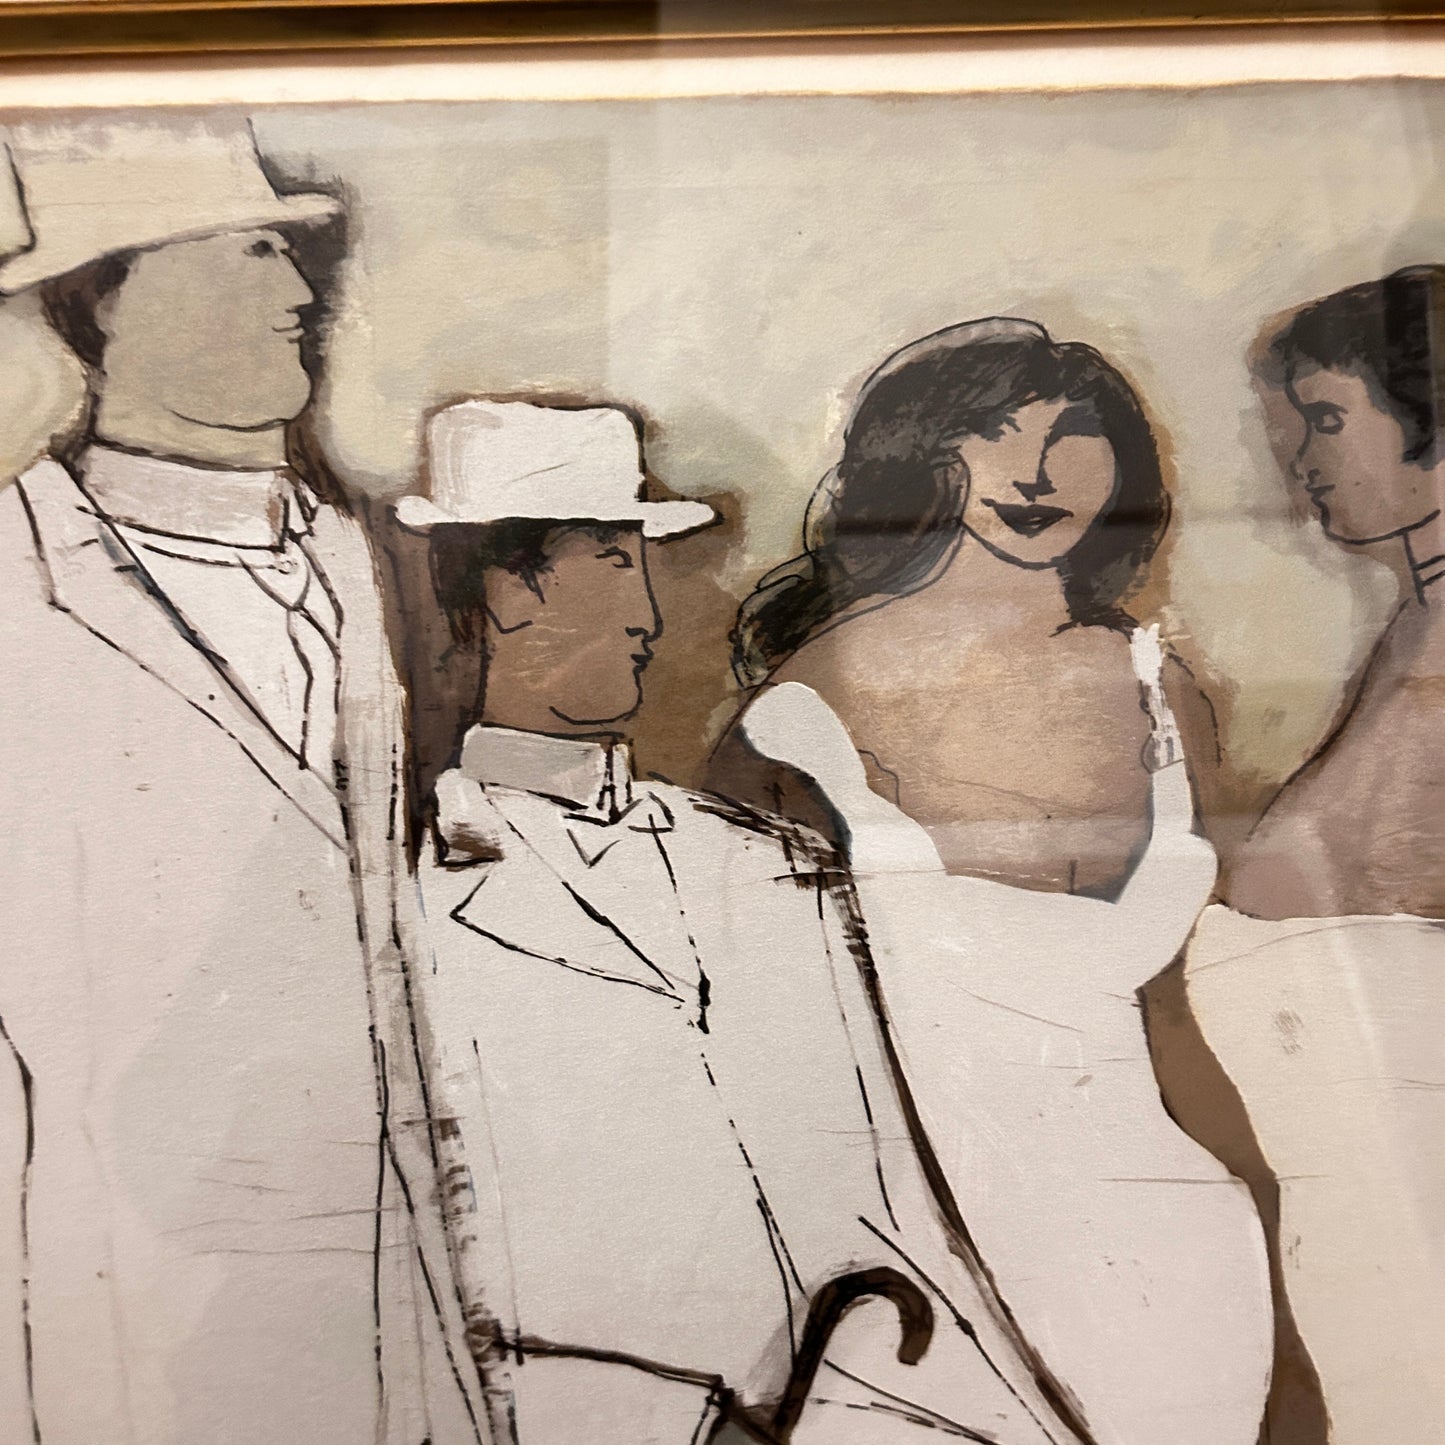 "Women In White" David Schneuer Signed Lithograph  30" x 33.75"